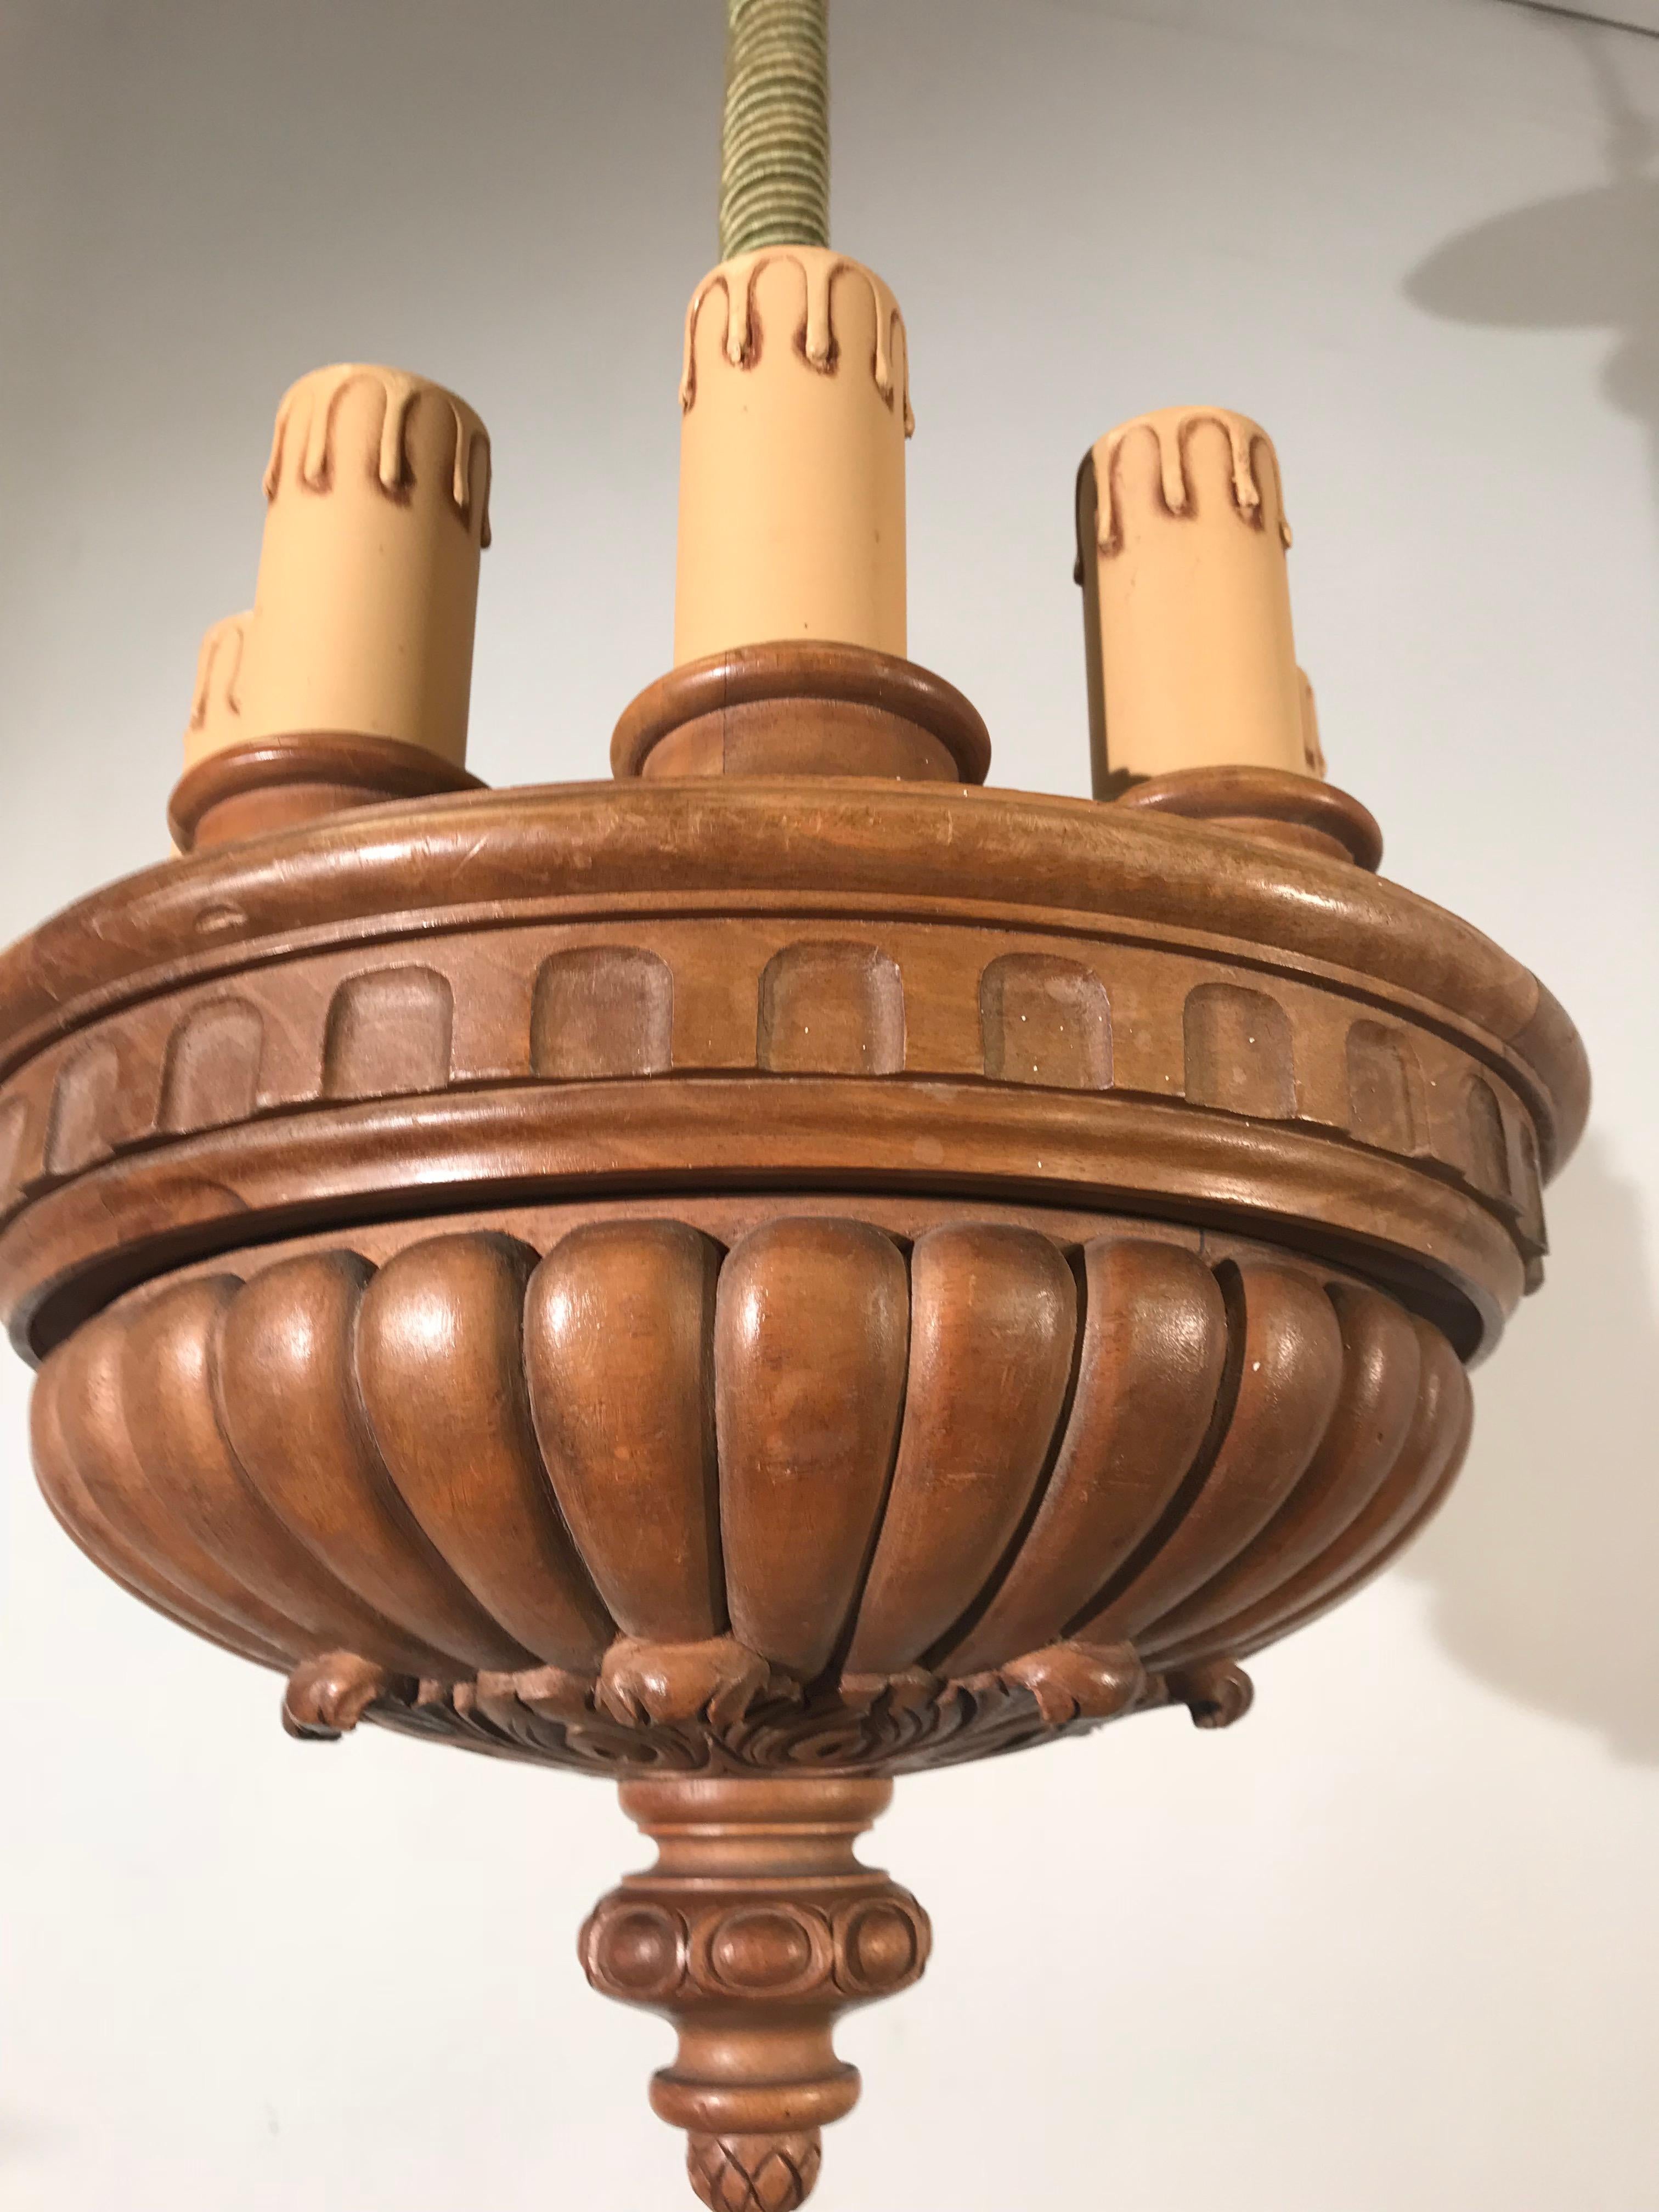 Rare and Decorative Early 1900s Eight-Light Quality Carved Nutwood Pendant Light For Sale 7